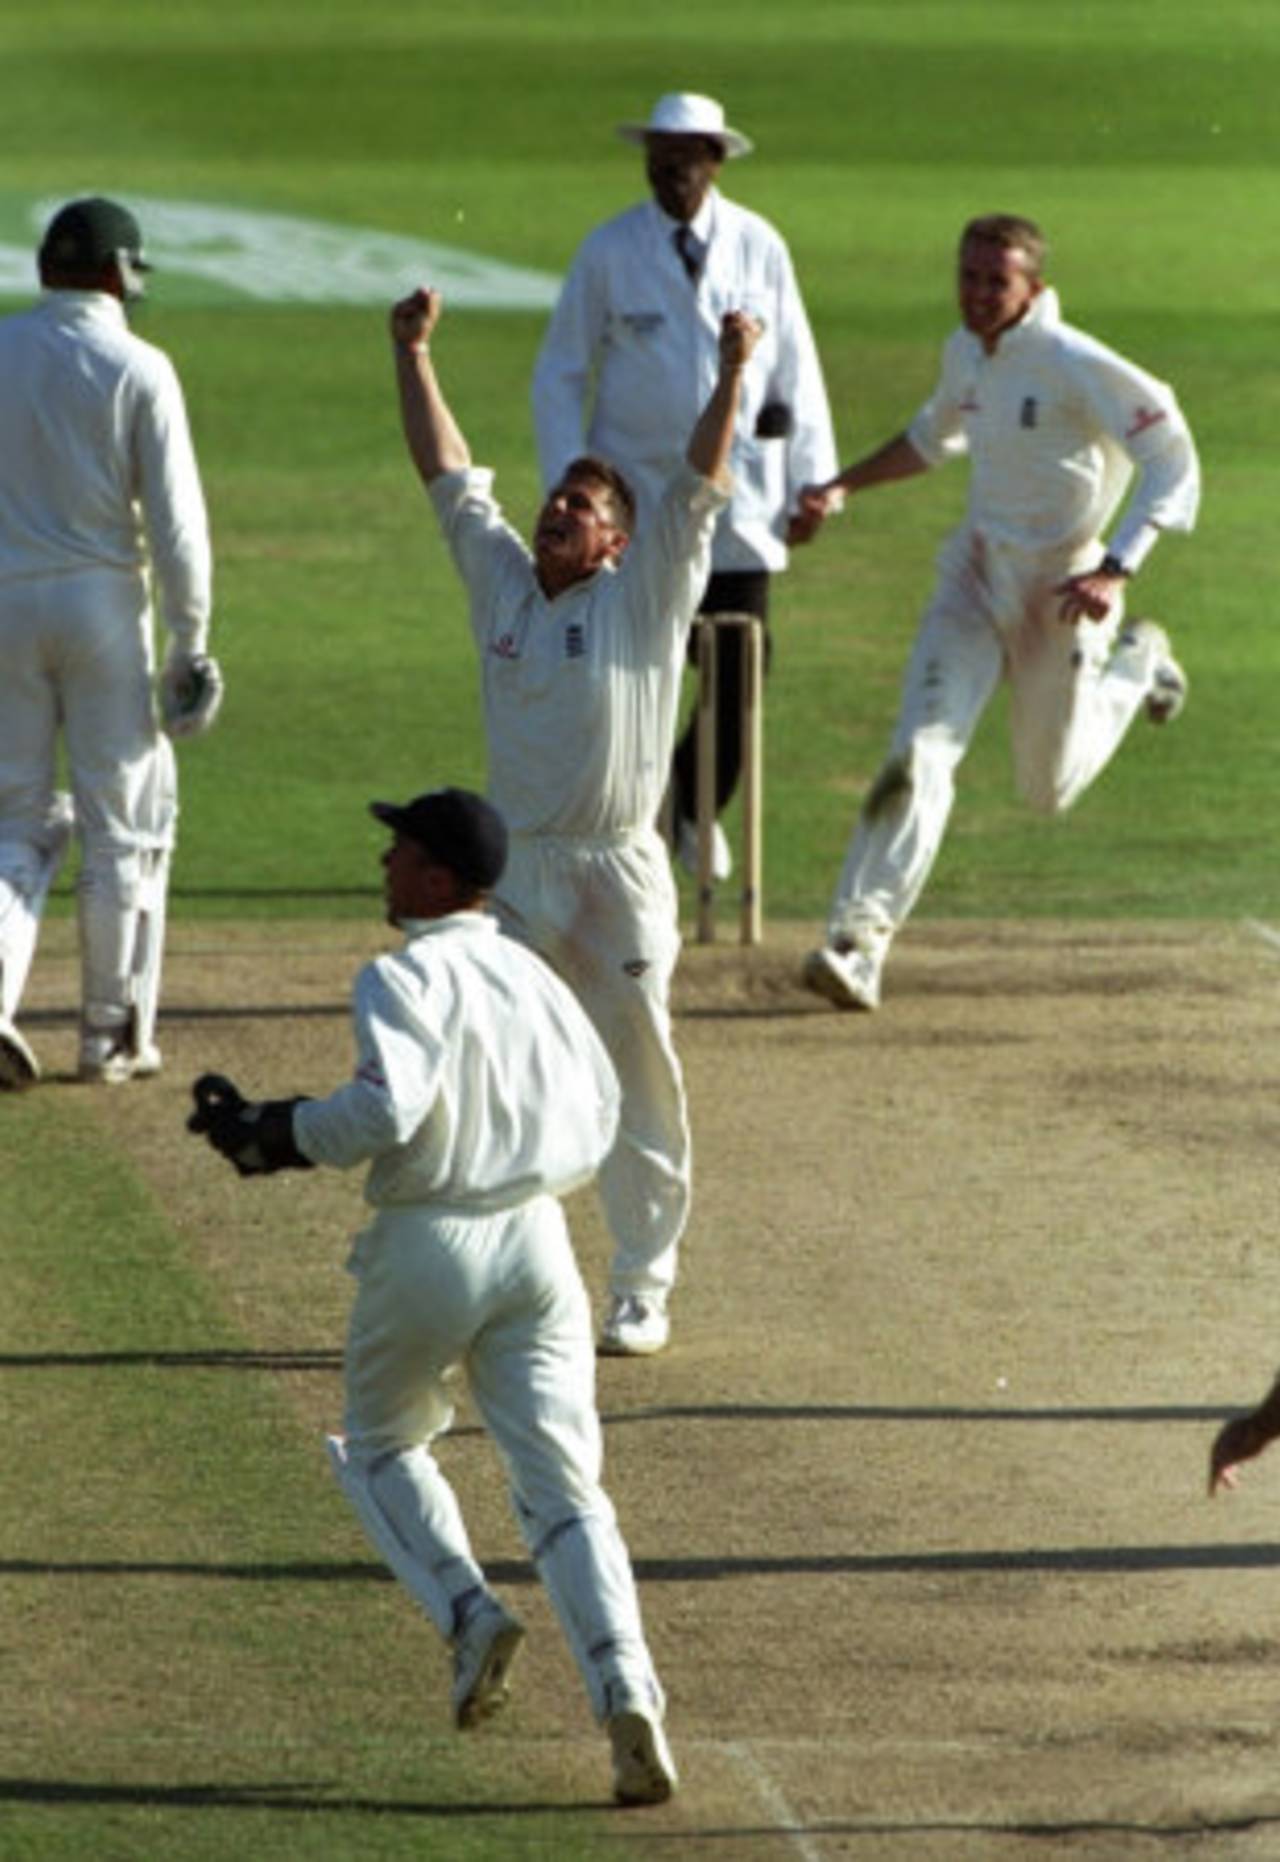 Darren Gough celebrates the wicket of Jonty Rhodes, England v South Africa, 5th Test, Headingley, 4th day, August 9, 1998